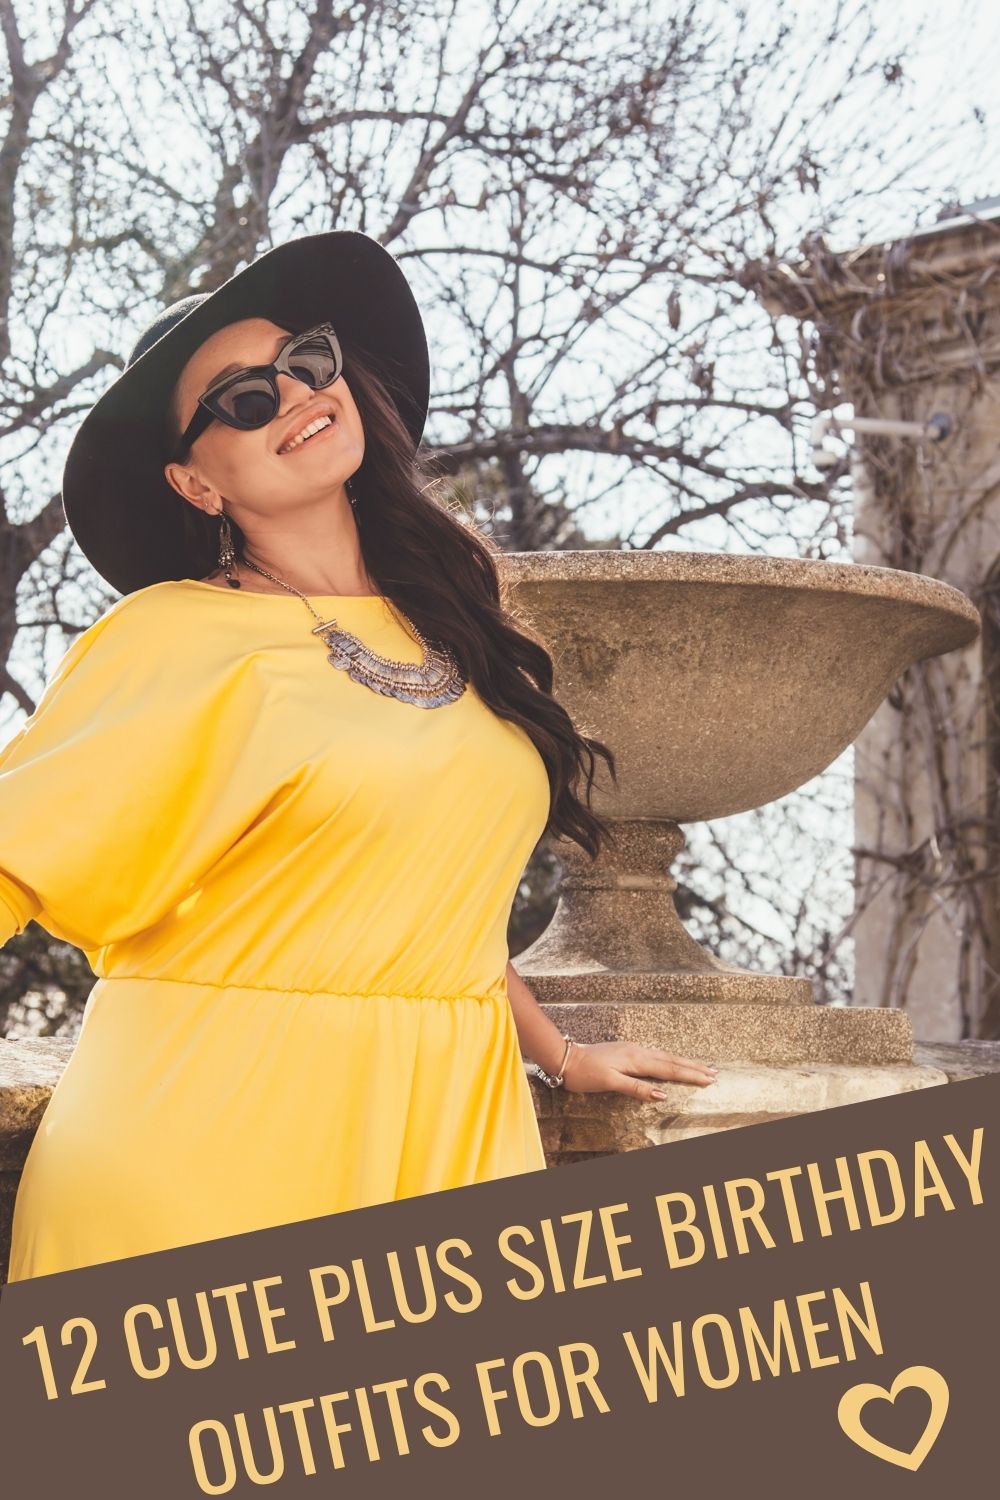 12 cute plus size birthday outfits for women